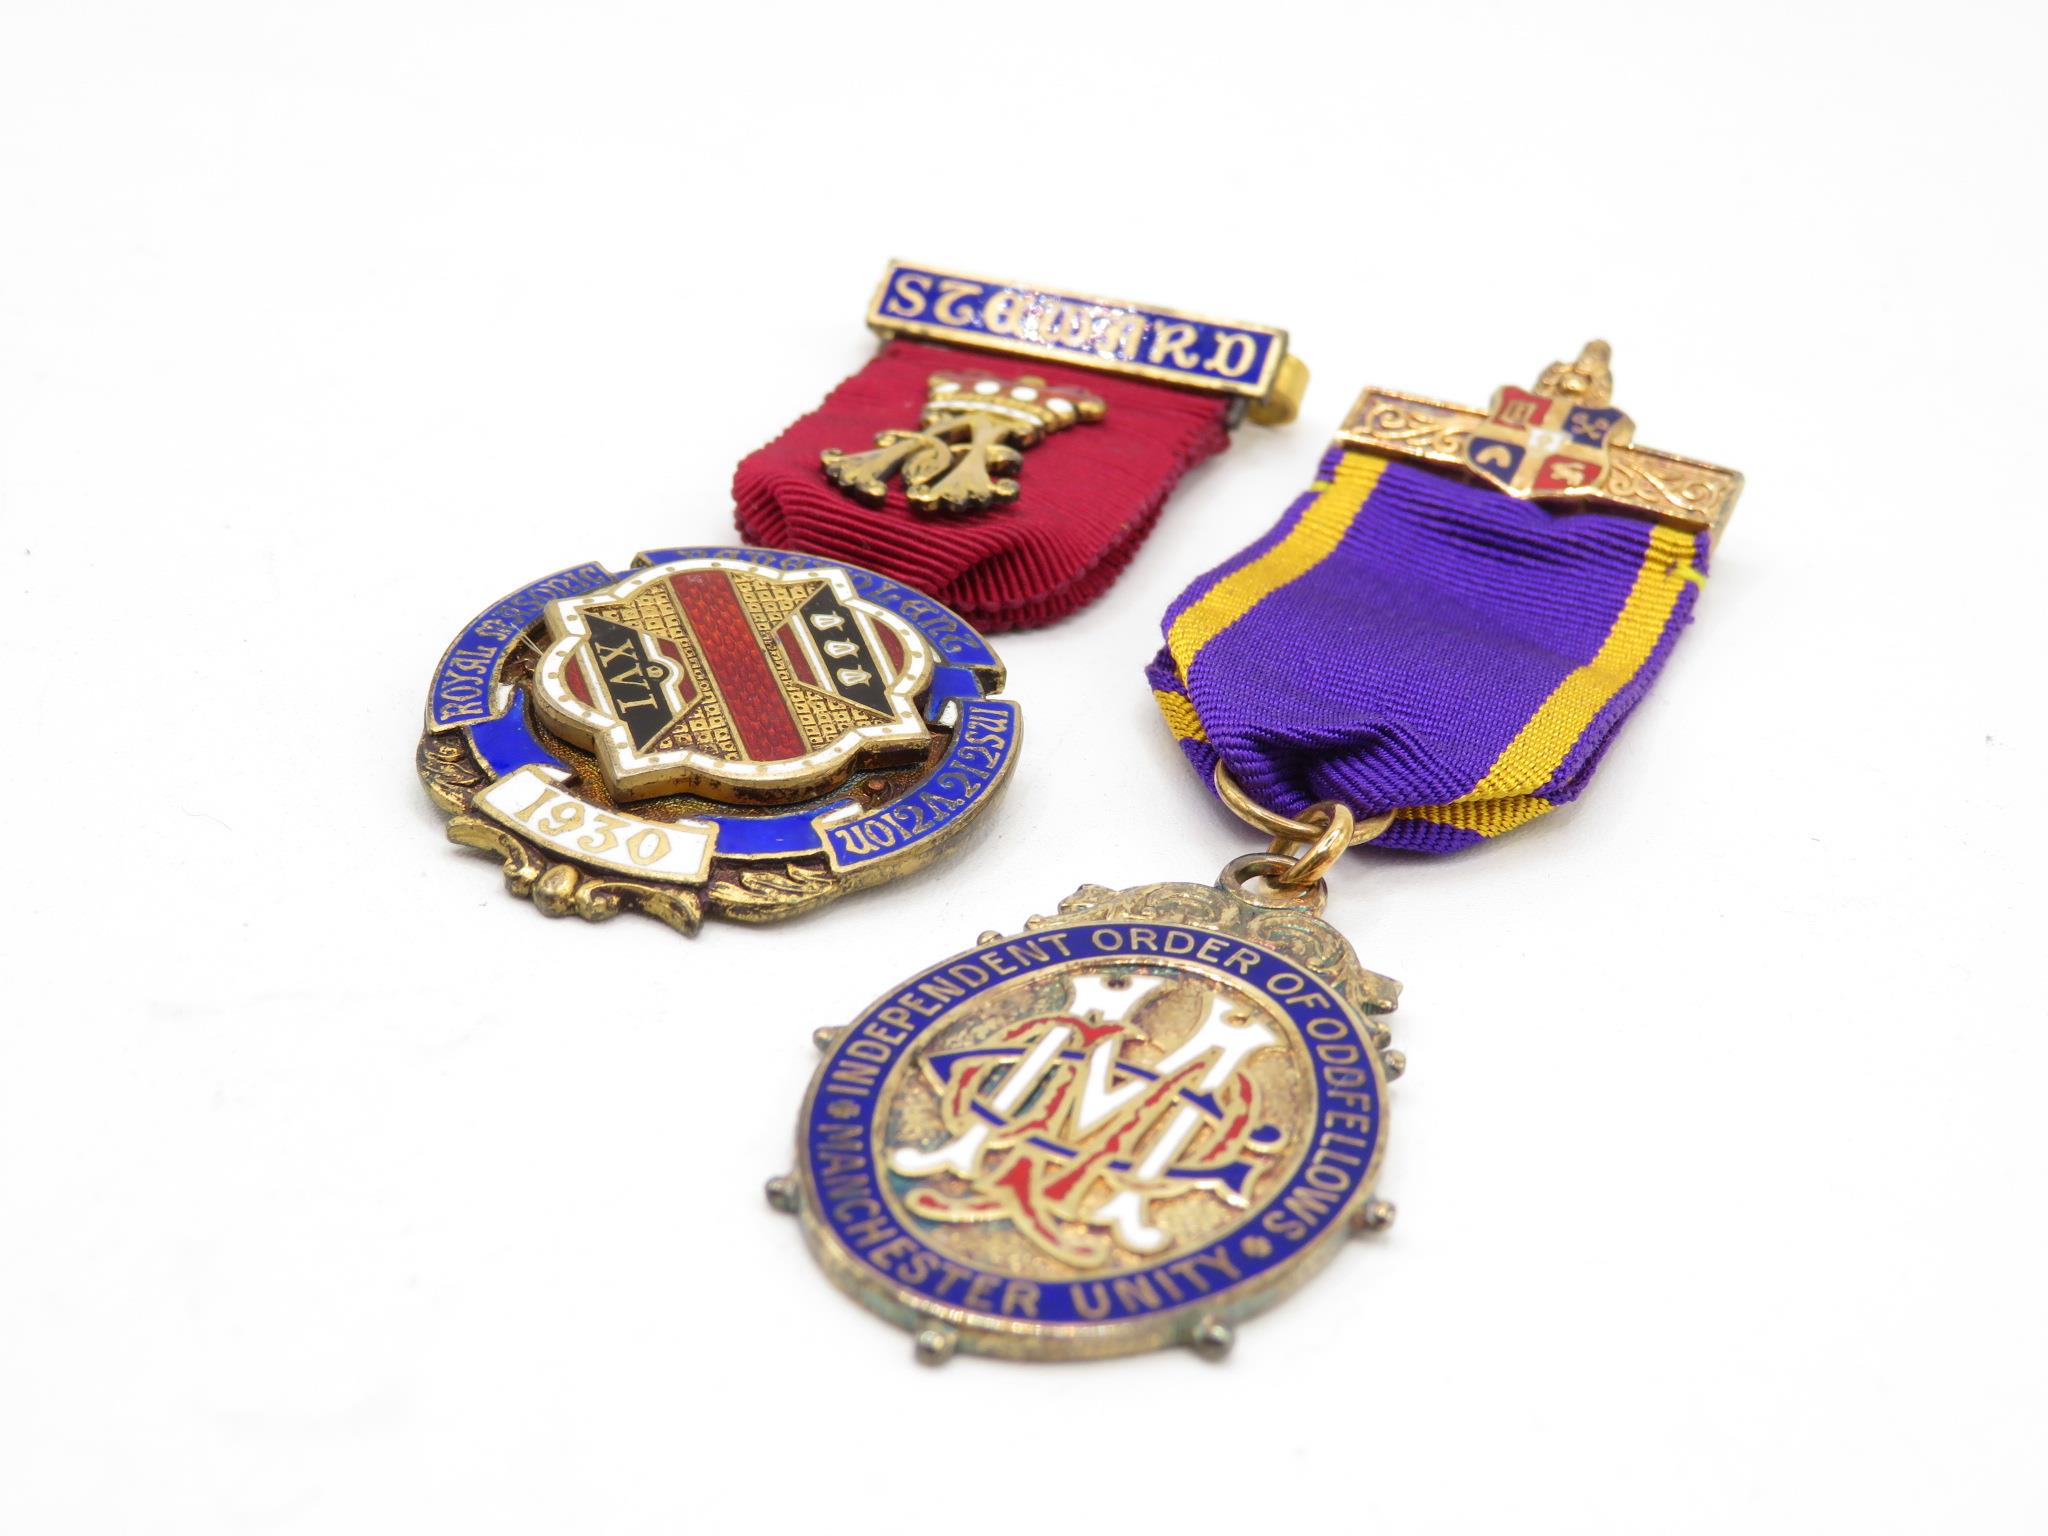 Silver and enamel Masonic medals 52g - Image 2 of 3